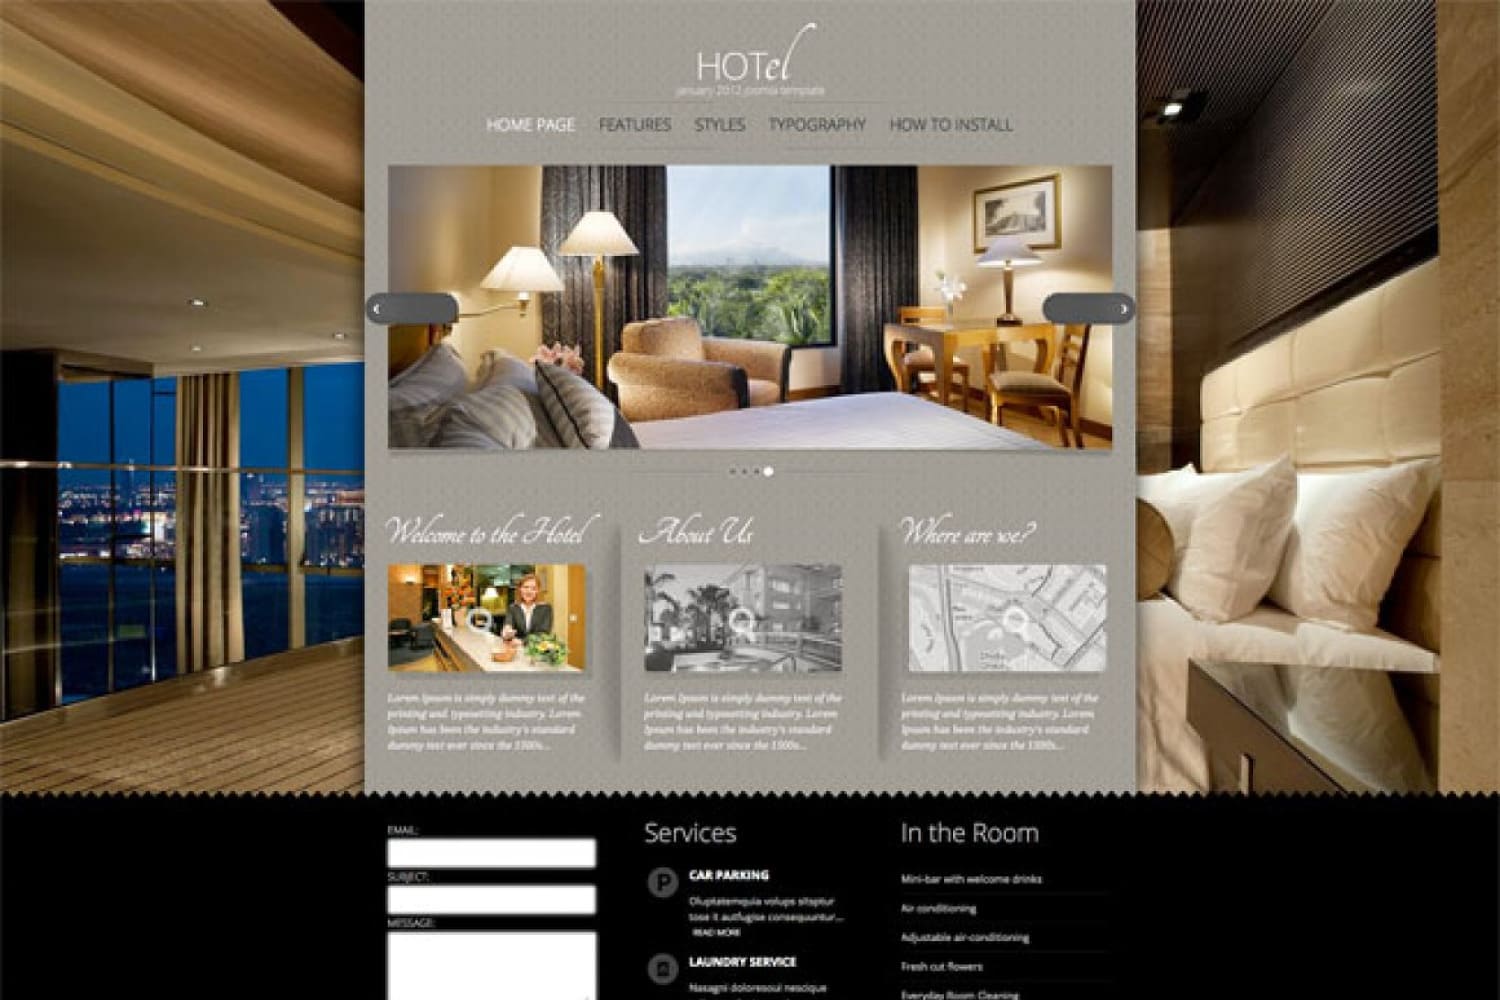 Home page of the hotel website with photos of the room and balcony in the background and a description of the hotel in front.